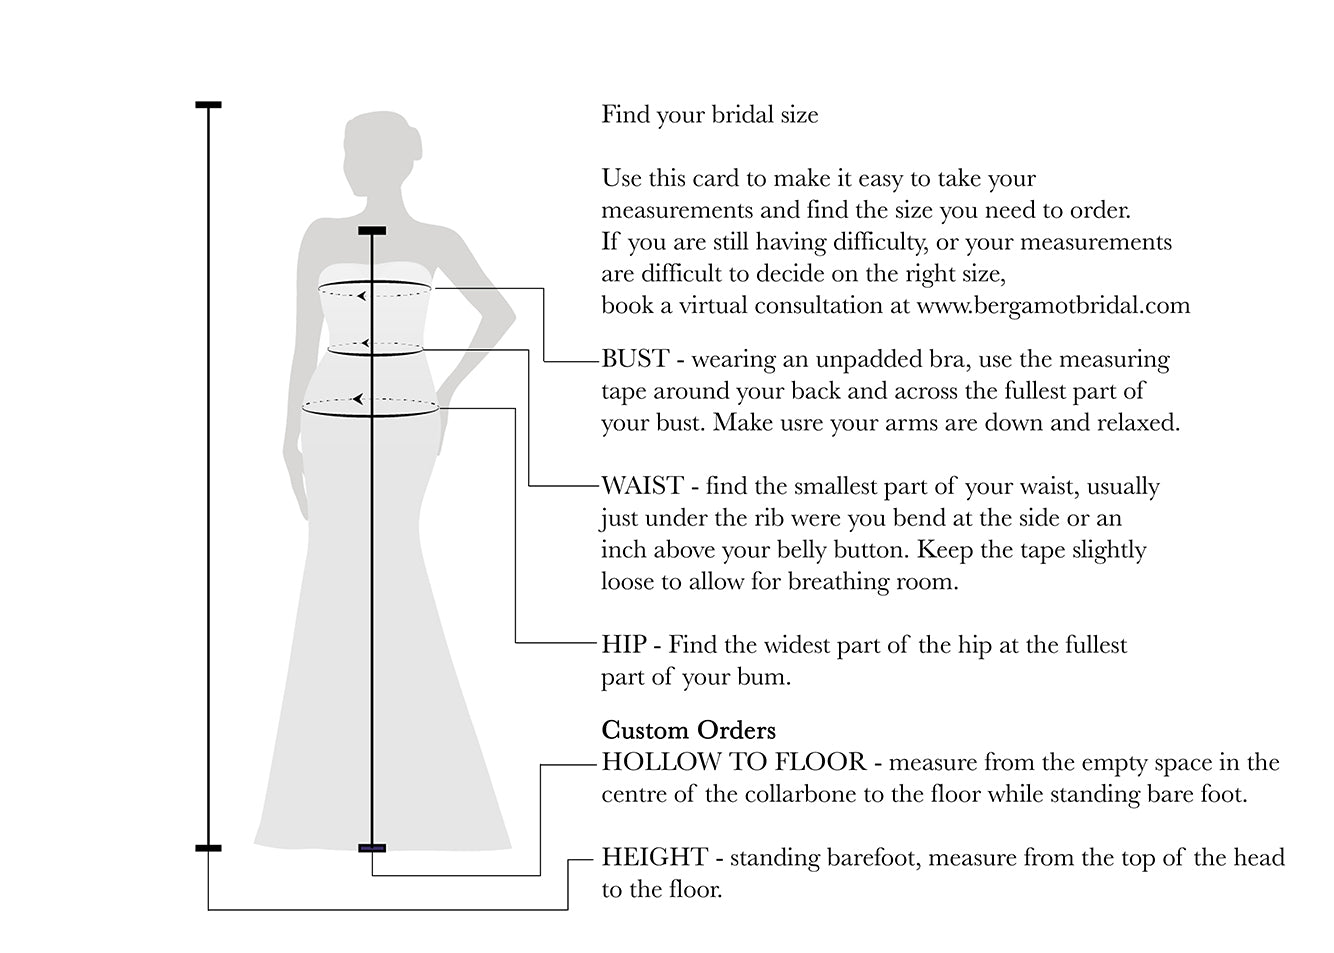 A diagram showing the measurements of a Lovely Lace V-neck wedding dress with Tulle Skirt in a Bergamot Bridal shop in London.